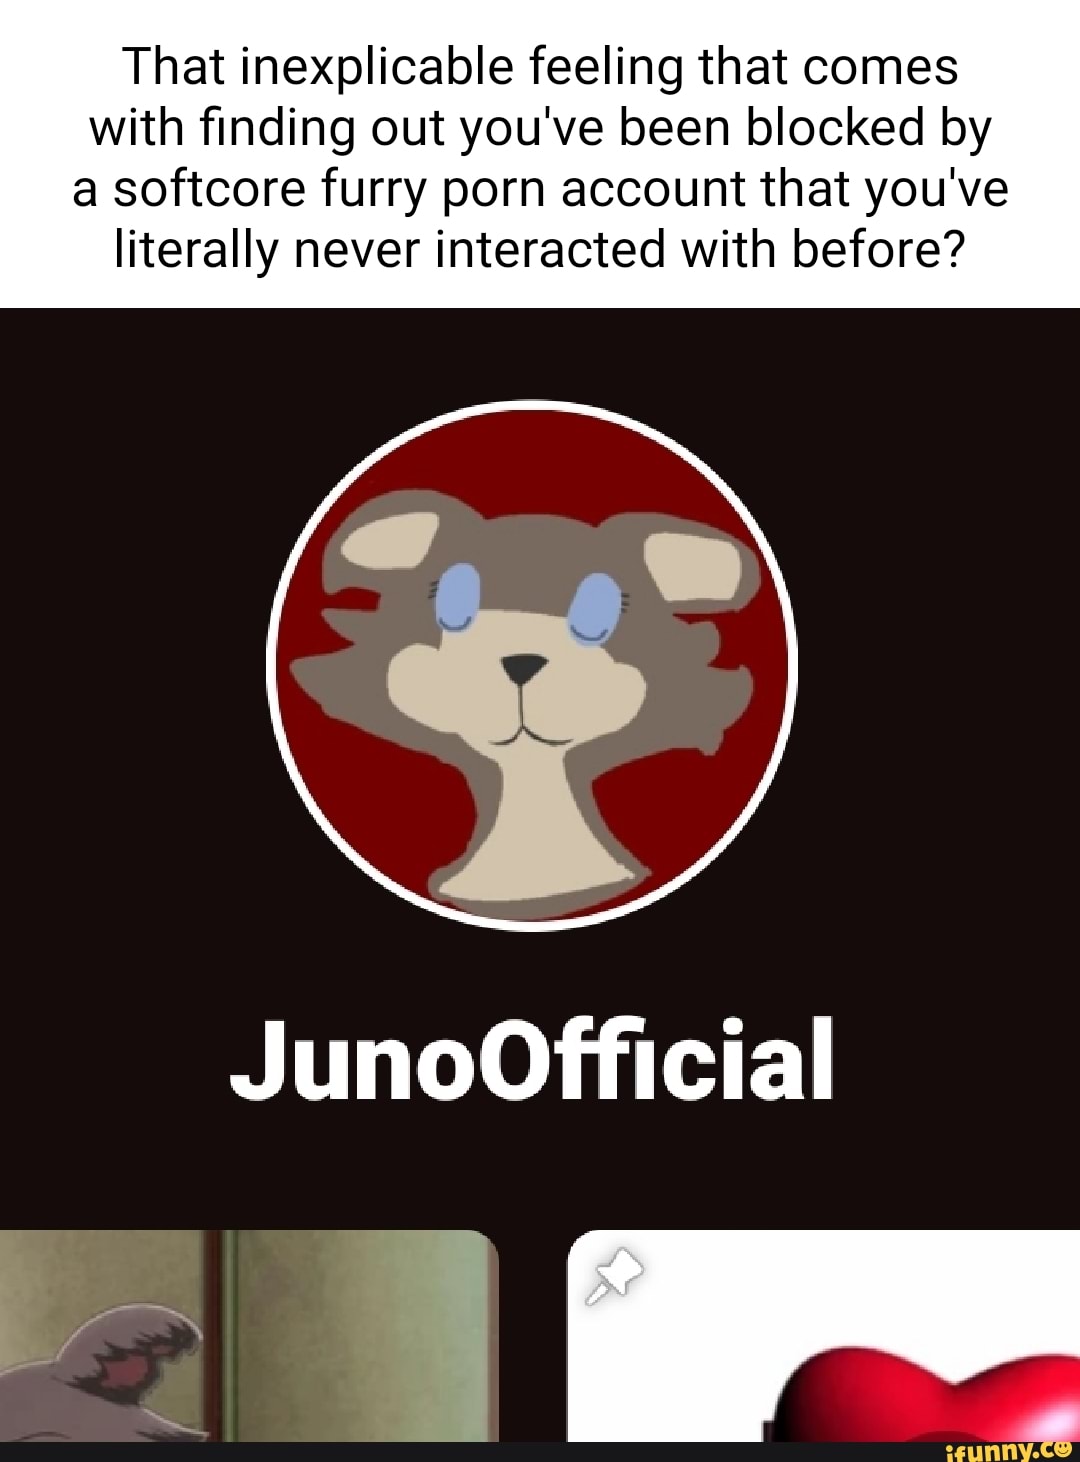 Softcore Furry Porn - That inexplicable feeling that comes with finding out you've been blocked  by softcore furry porn account that you've literally never interacted with  before? JunoOfficial - iFunny Brazil